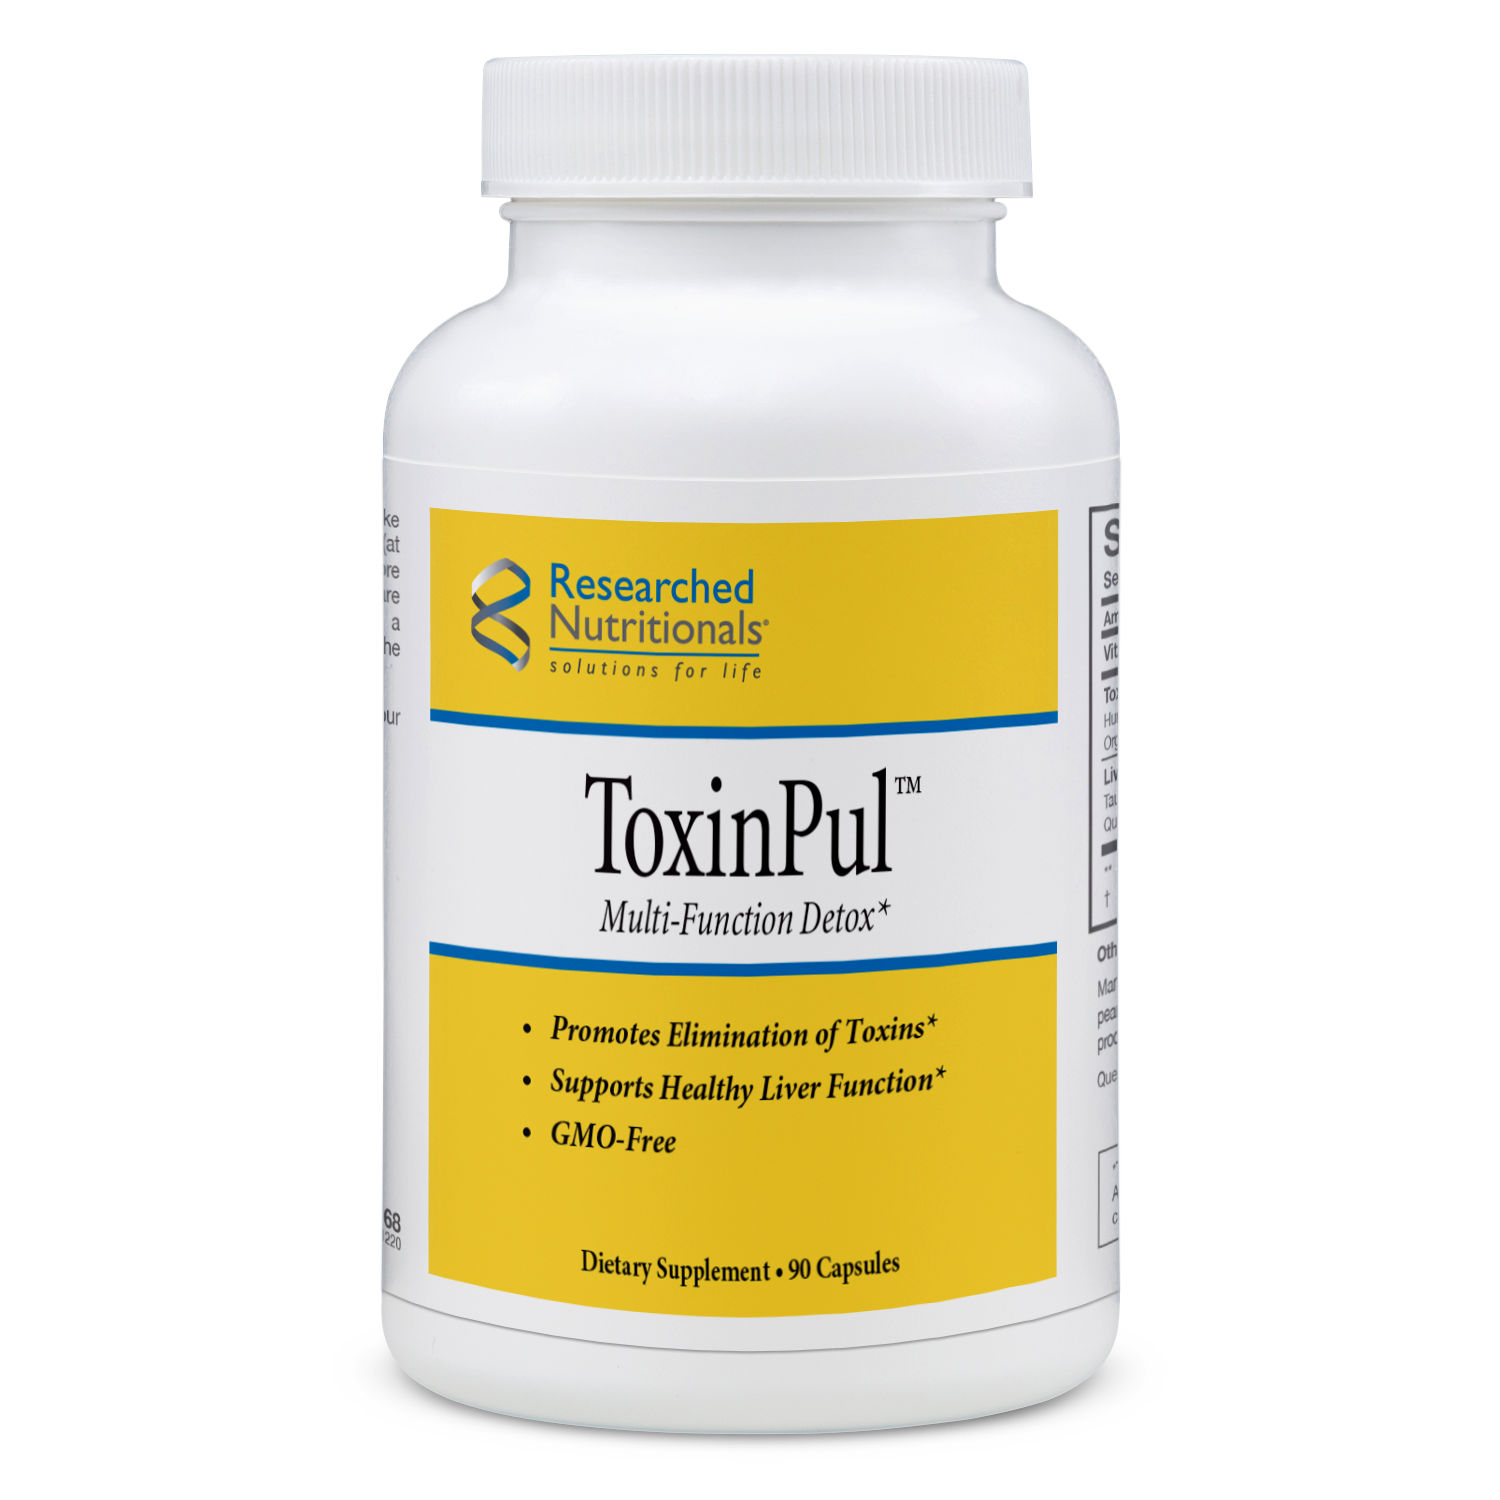 Researched Naturals ToxinPul Multi-Function Detox Capsules 90